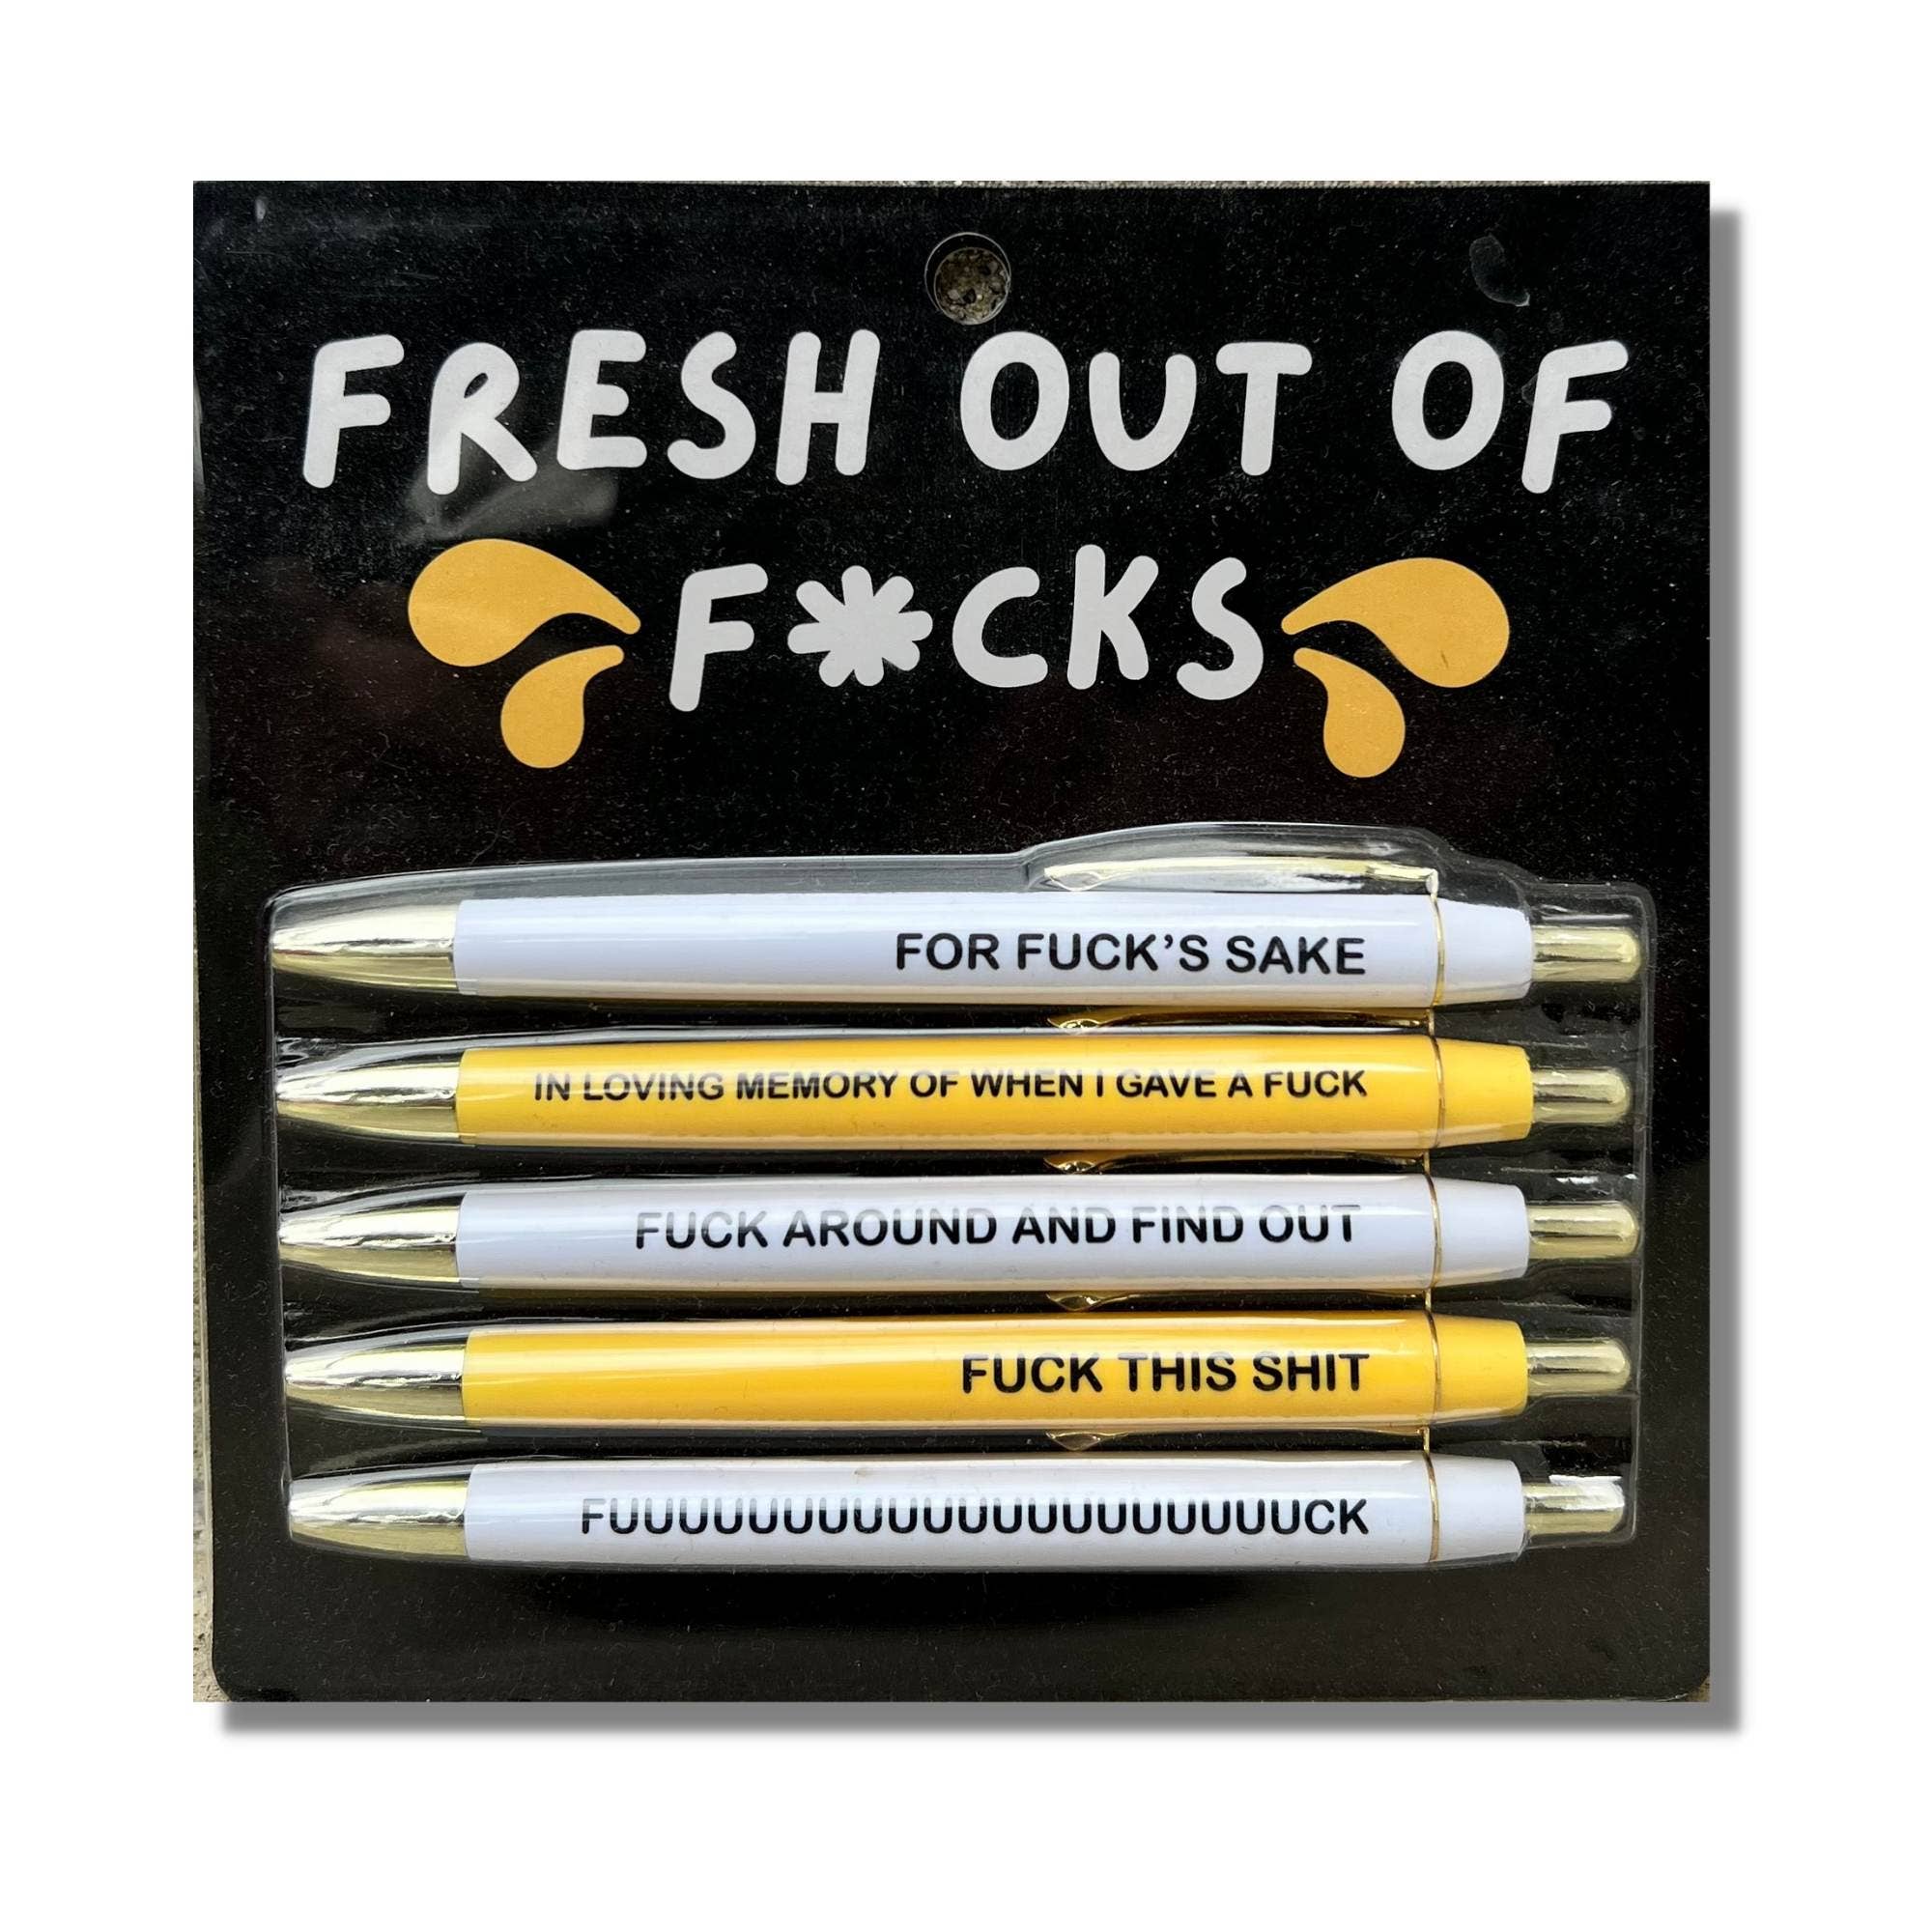 Fresh Out of Fcks Pen and Pad Set, Fresh Outta Fucks Pad and Pen, Snarky  Novelty Fresh Outta Fucks Pen Set, Funny Pad and Pen Desk Accessory Office